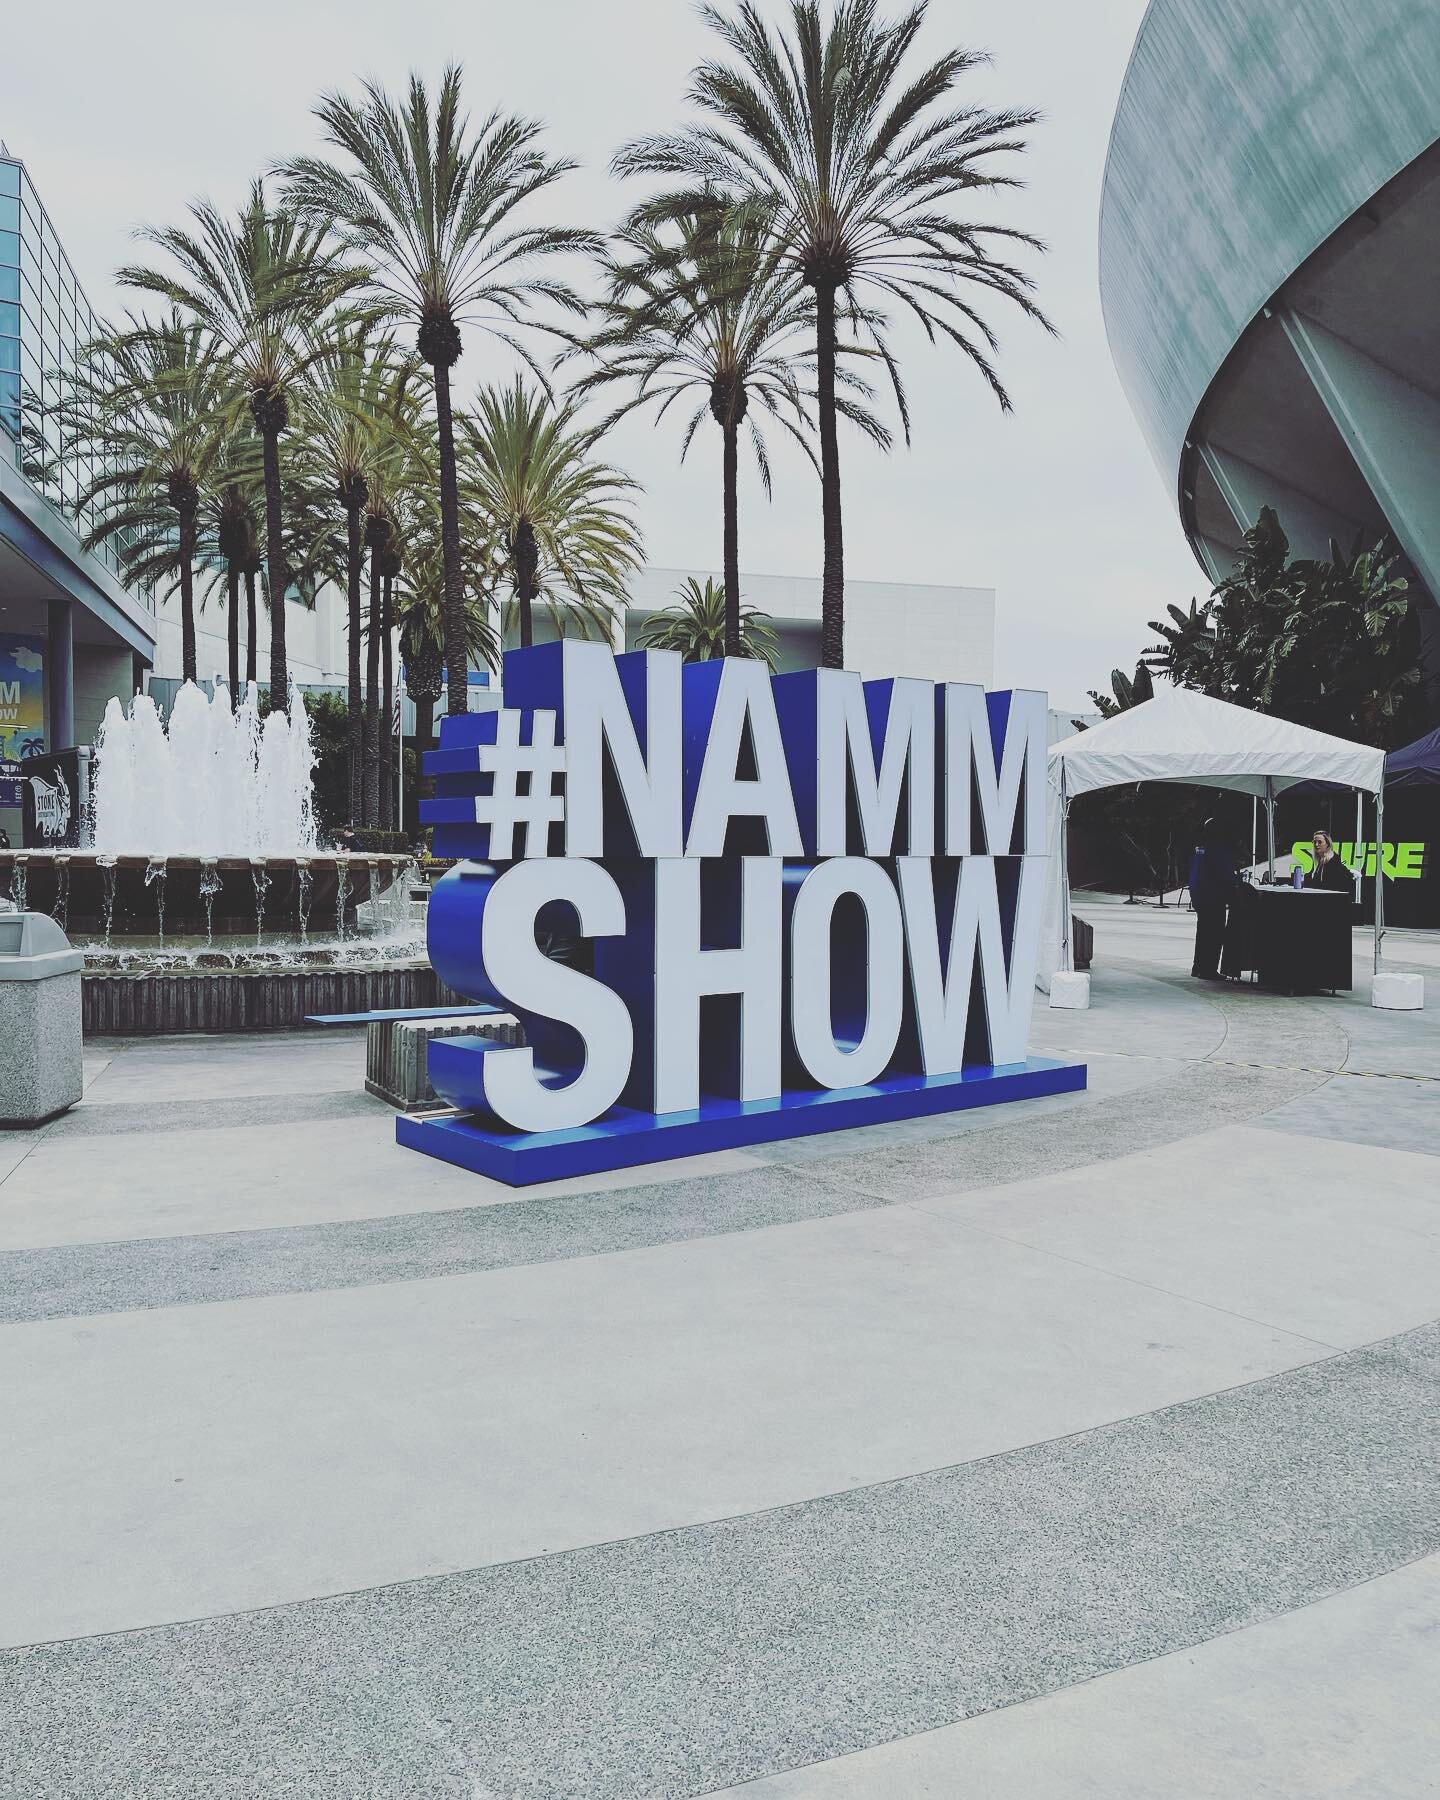 Come say hey if you are here! #nammshow